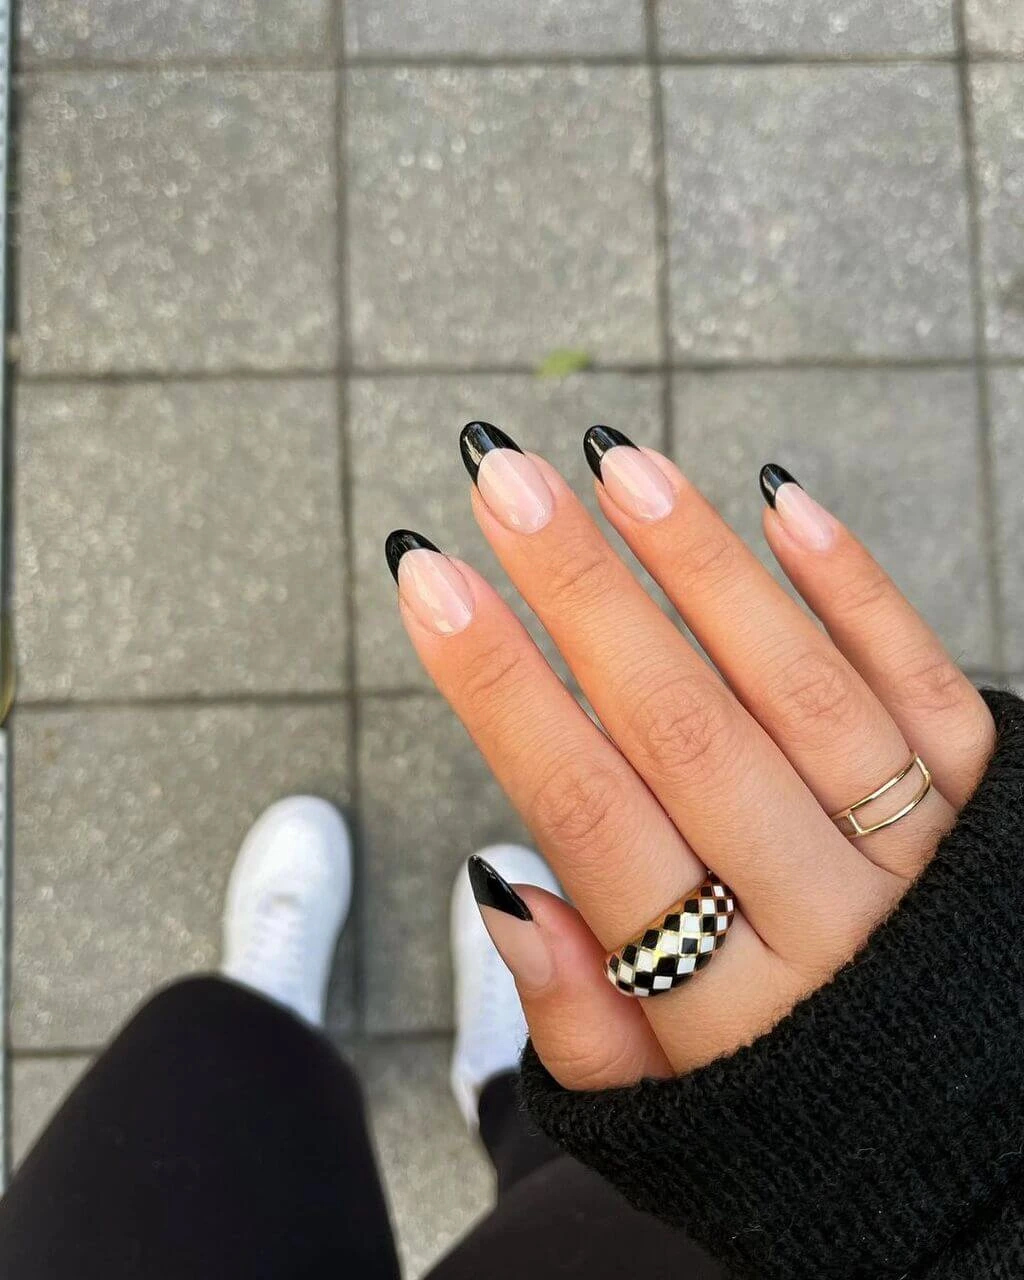 black french tip acrylic nails